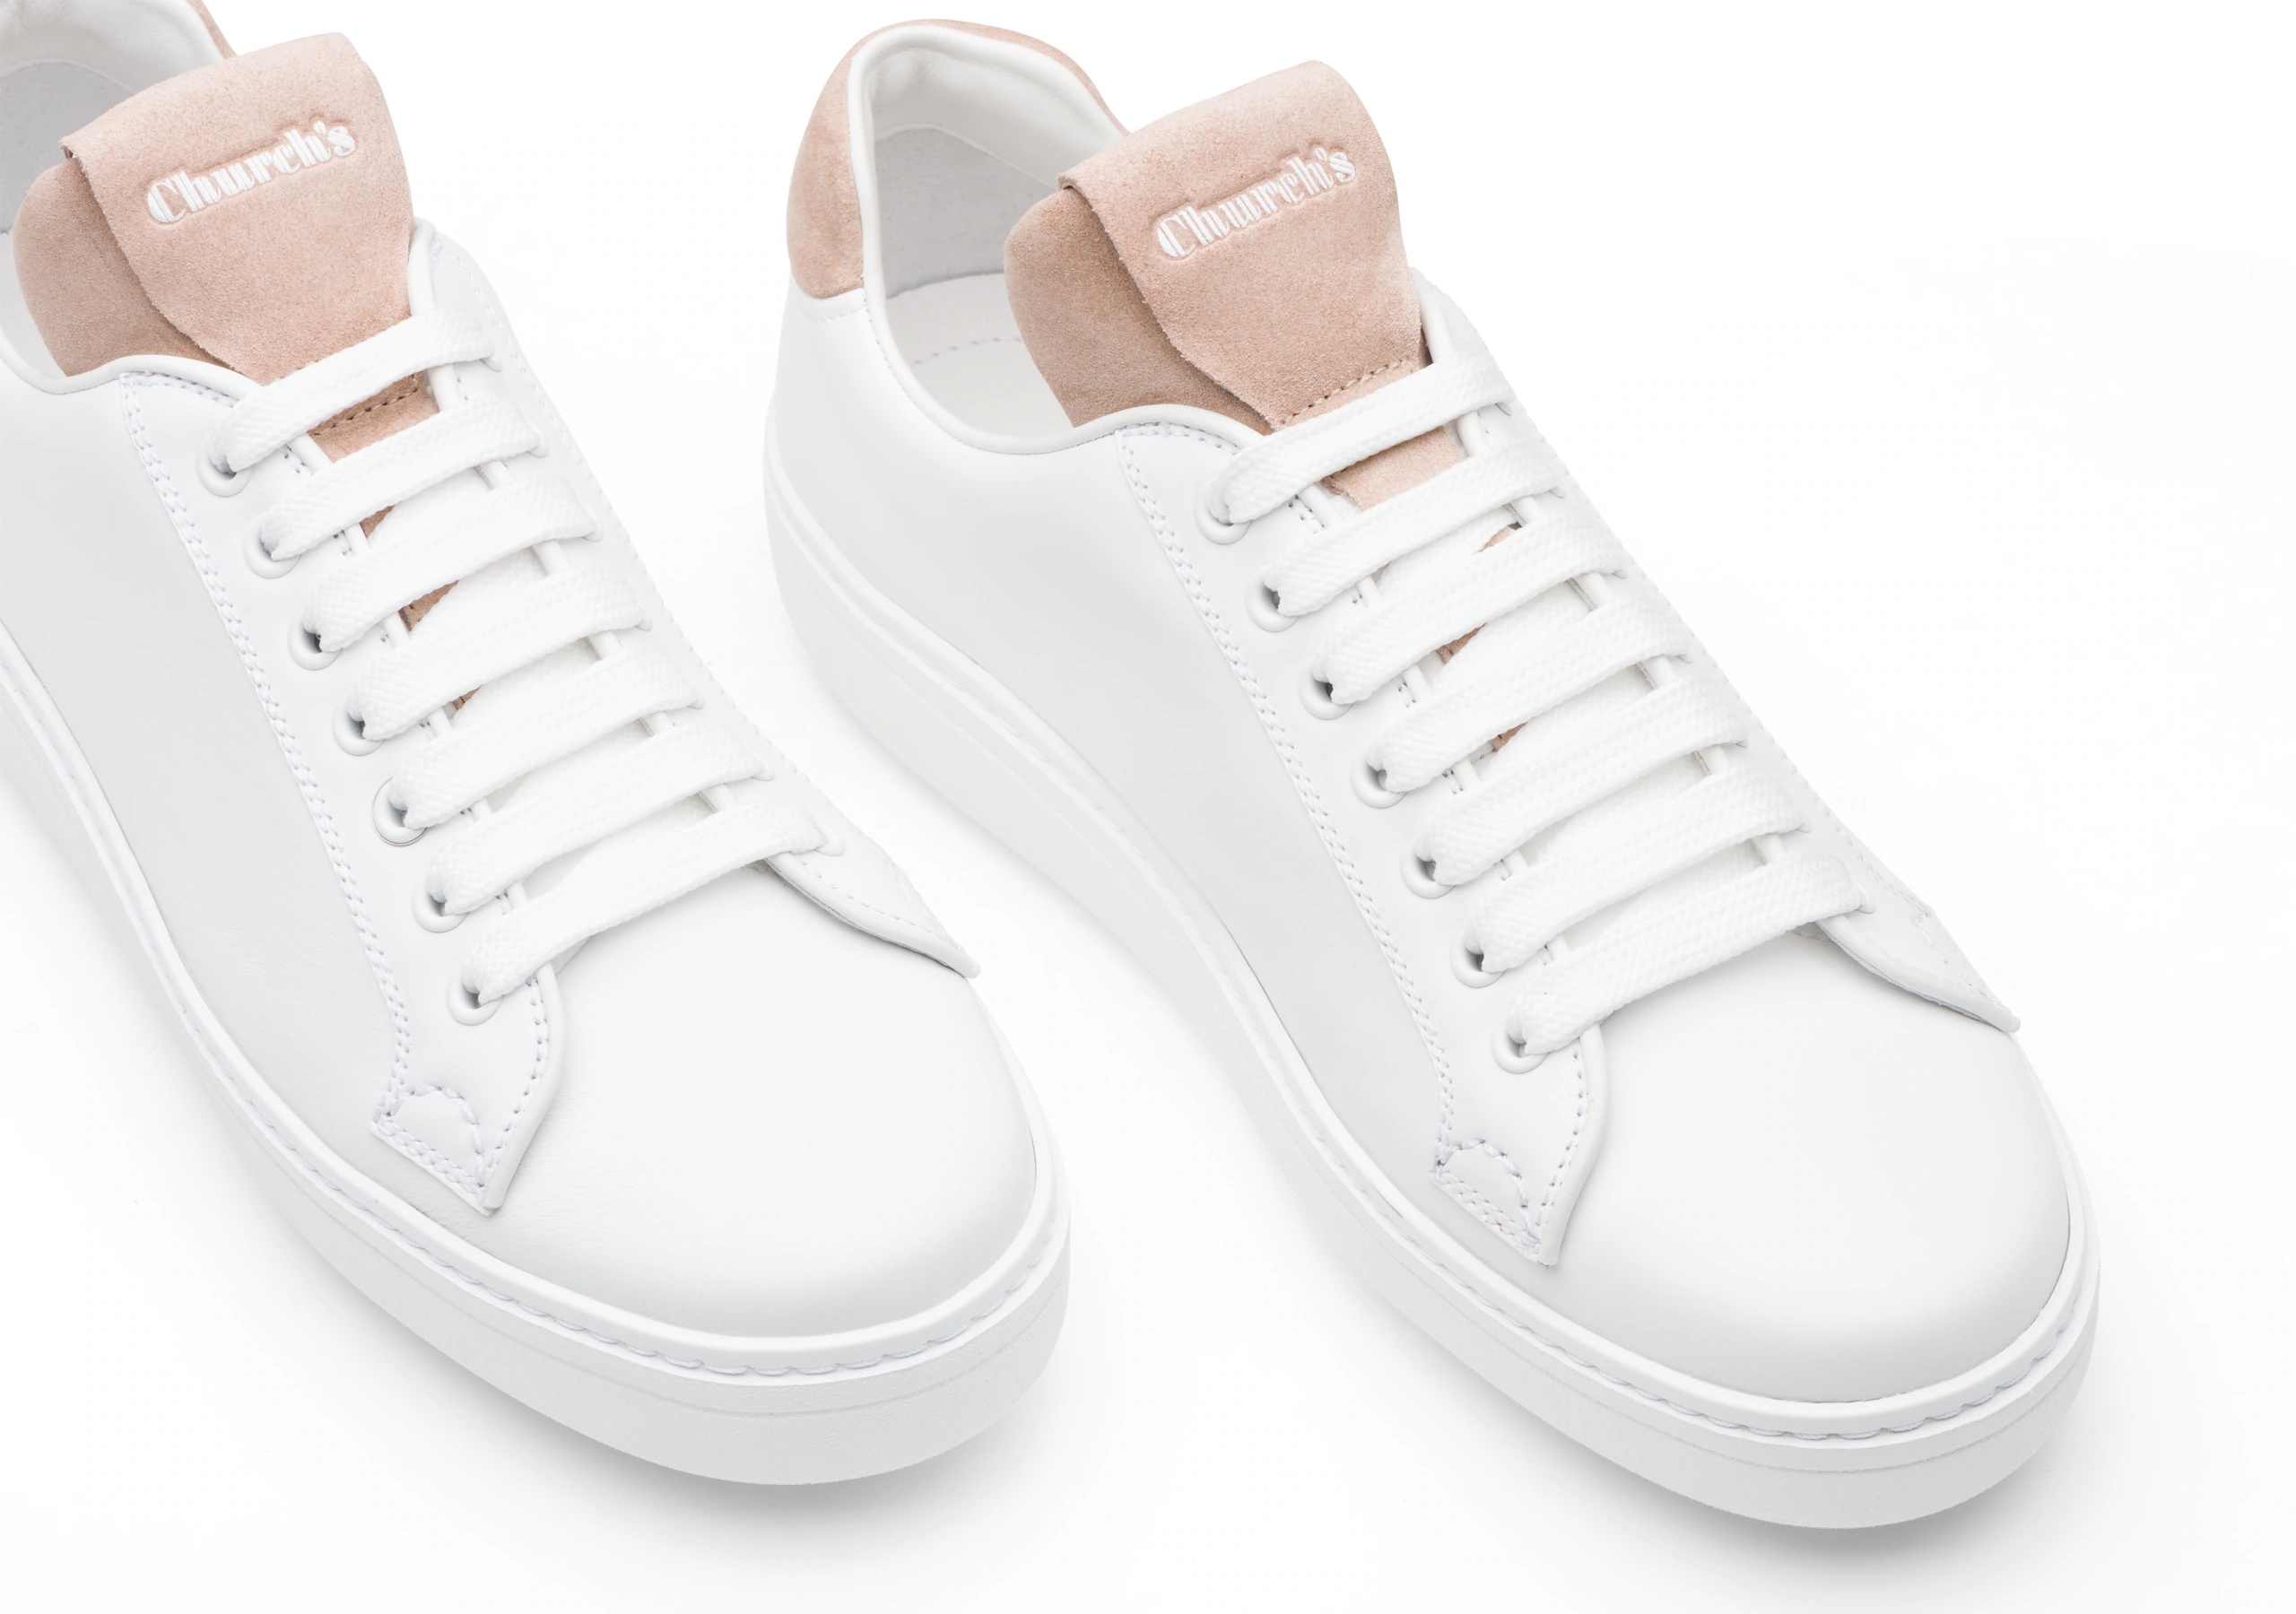 Boland
Calf Leather and Suede Classic Sneaker White/blush - 4